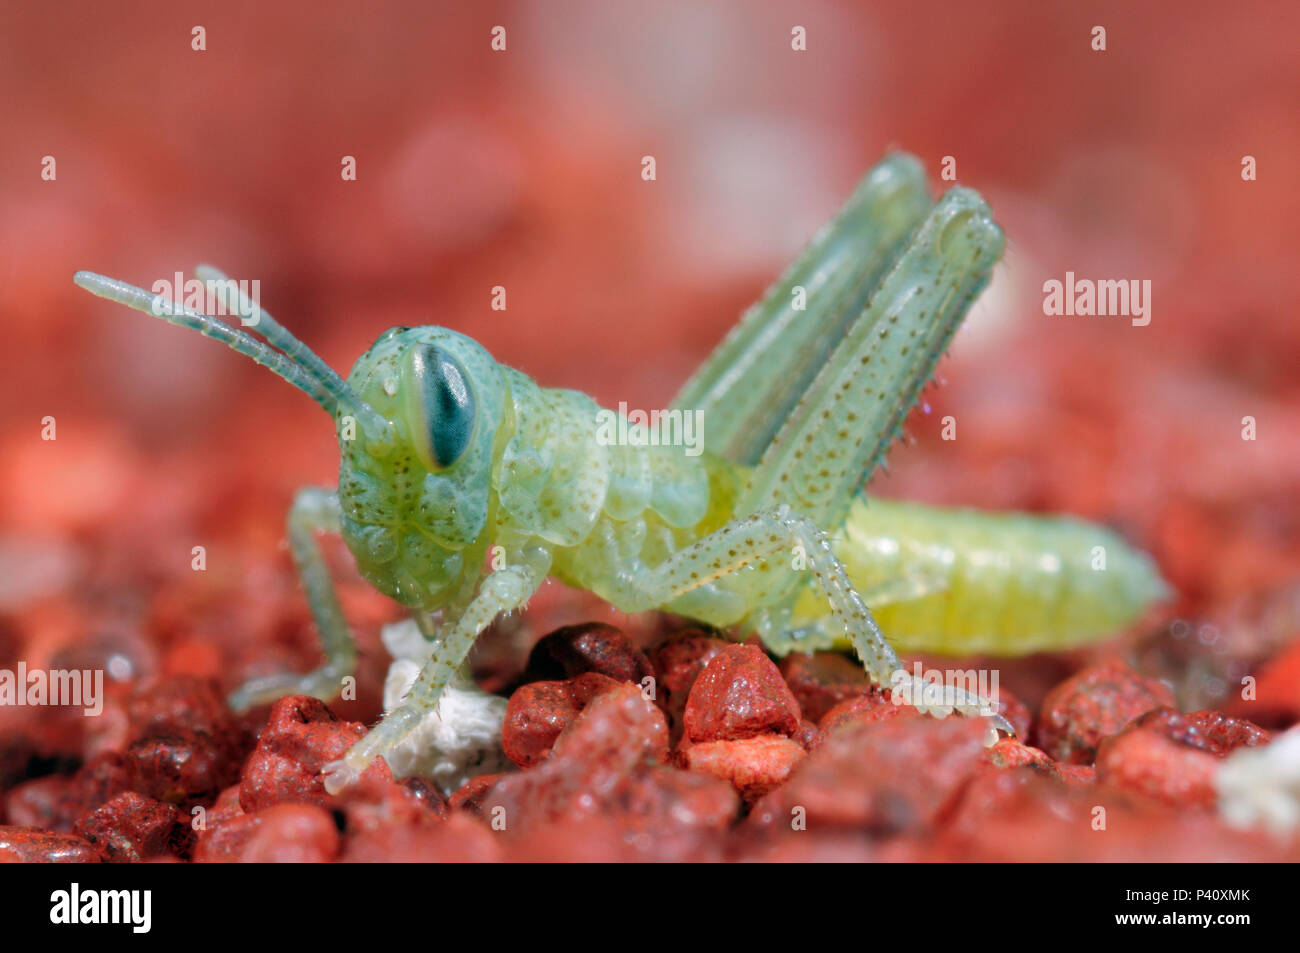 Desert Locust (Schistocerca gregaria) hatching from ground, native to Afria and Asia. Sequence 4 of 4 Stock Photo